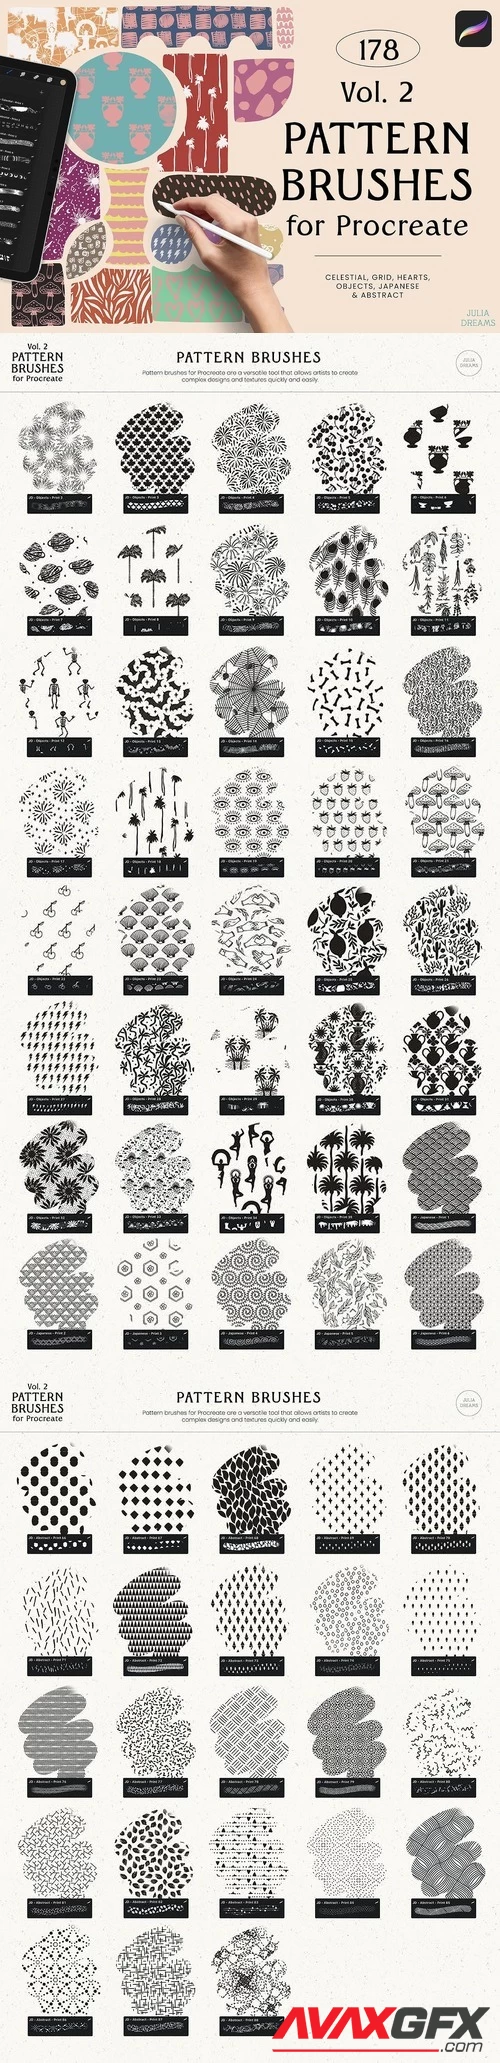 Pattern Brushes for Procreate Vol 2